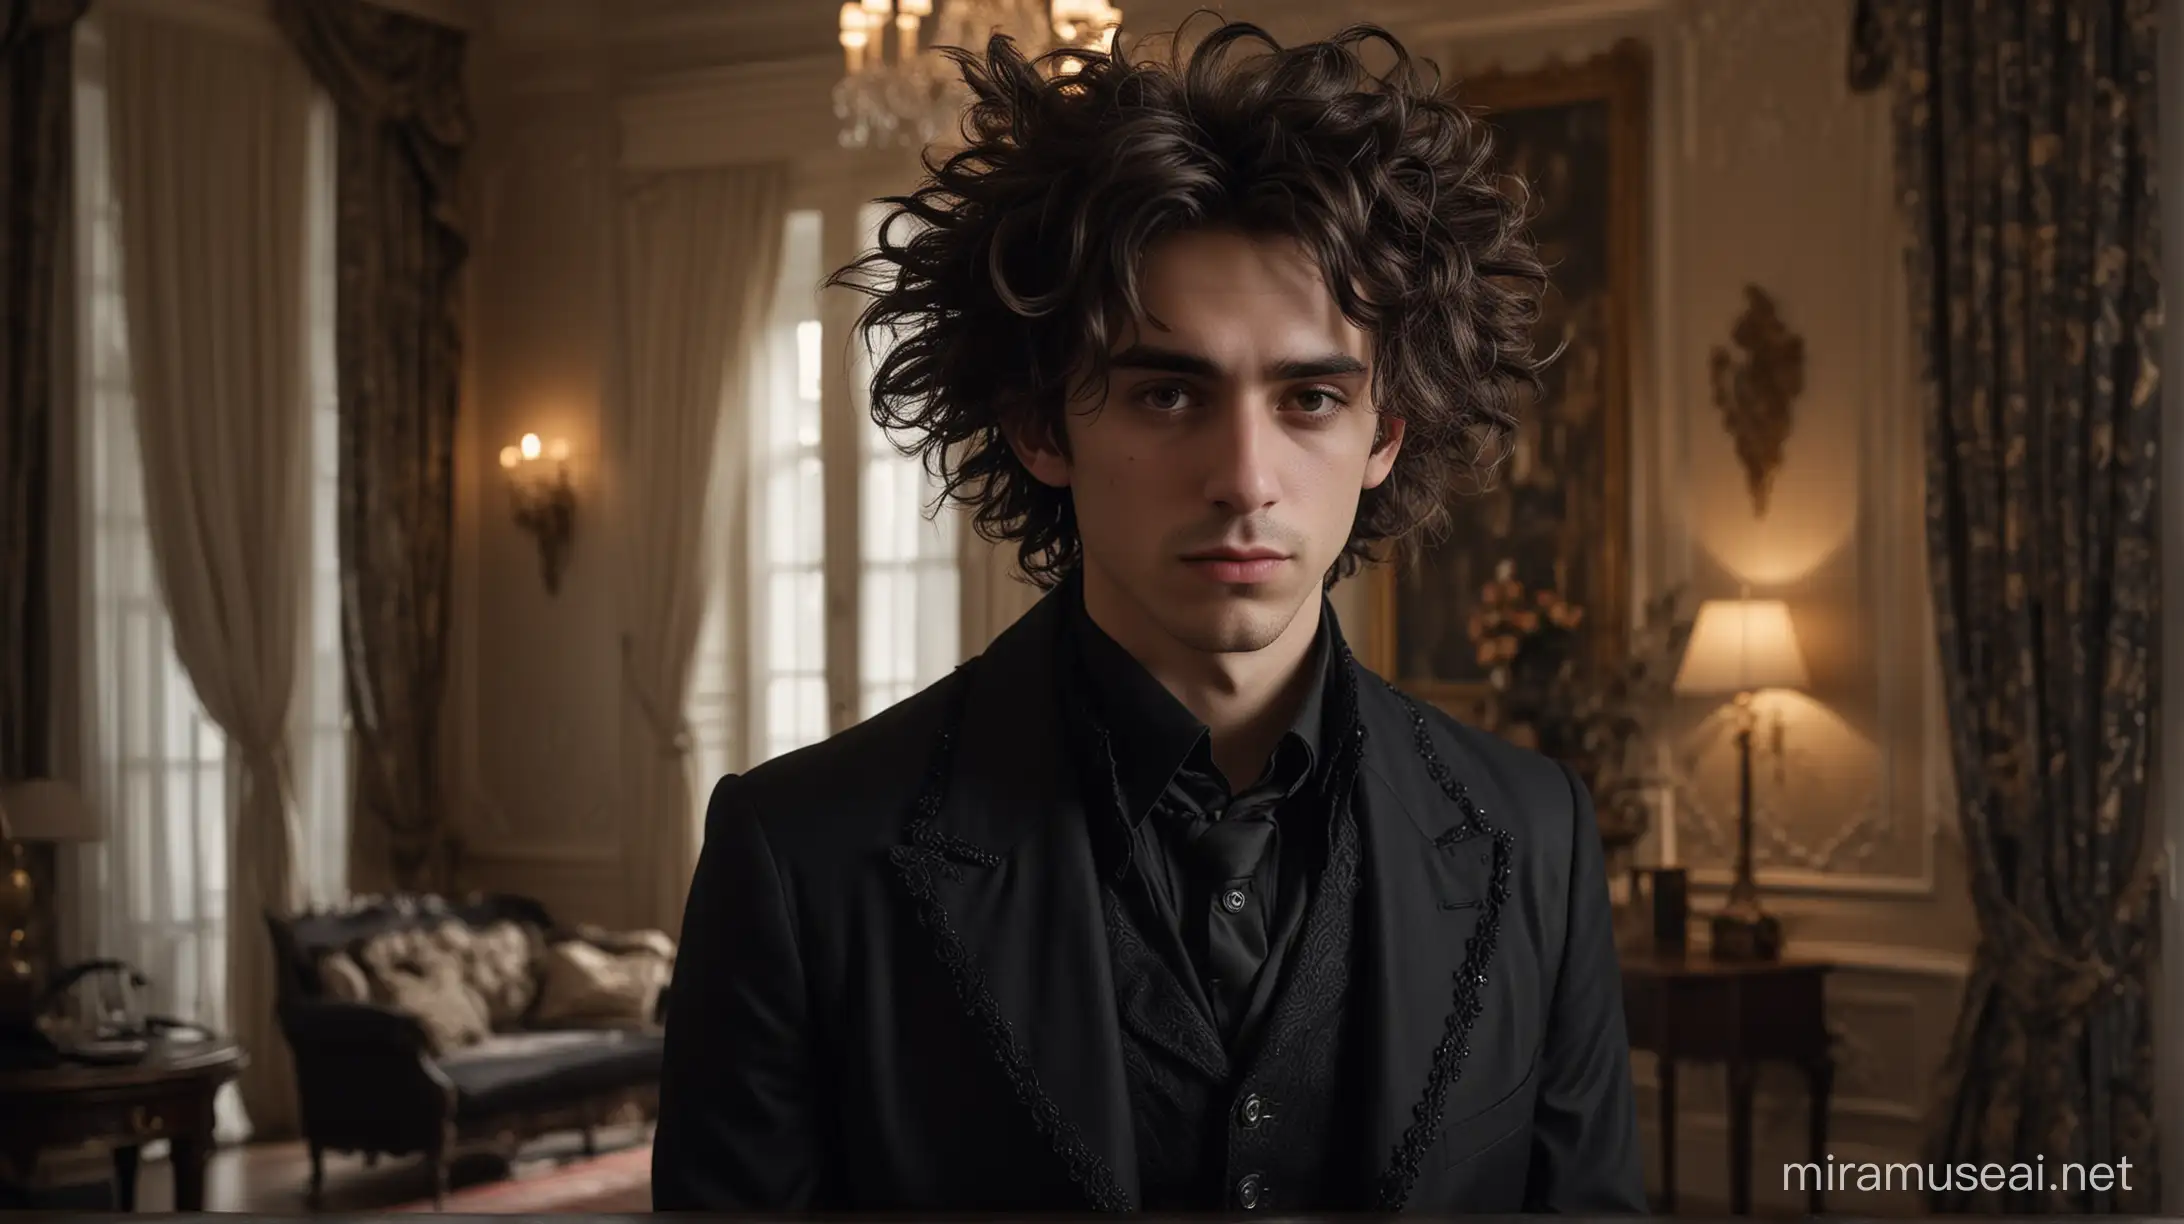 UltraRealistic 23YearOld Man in Gothic Attire with Sad Eyes in Eloquent Living Room